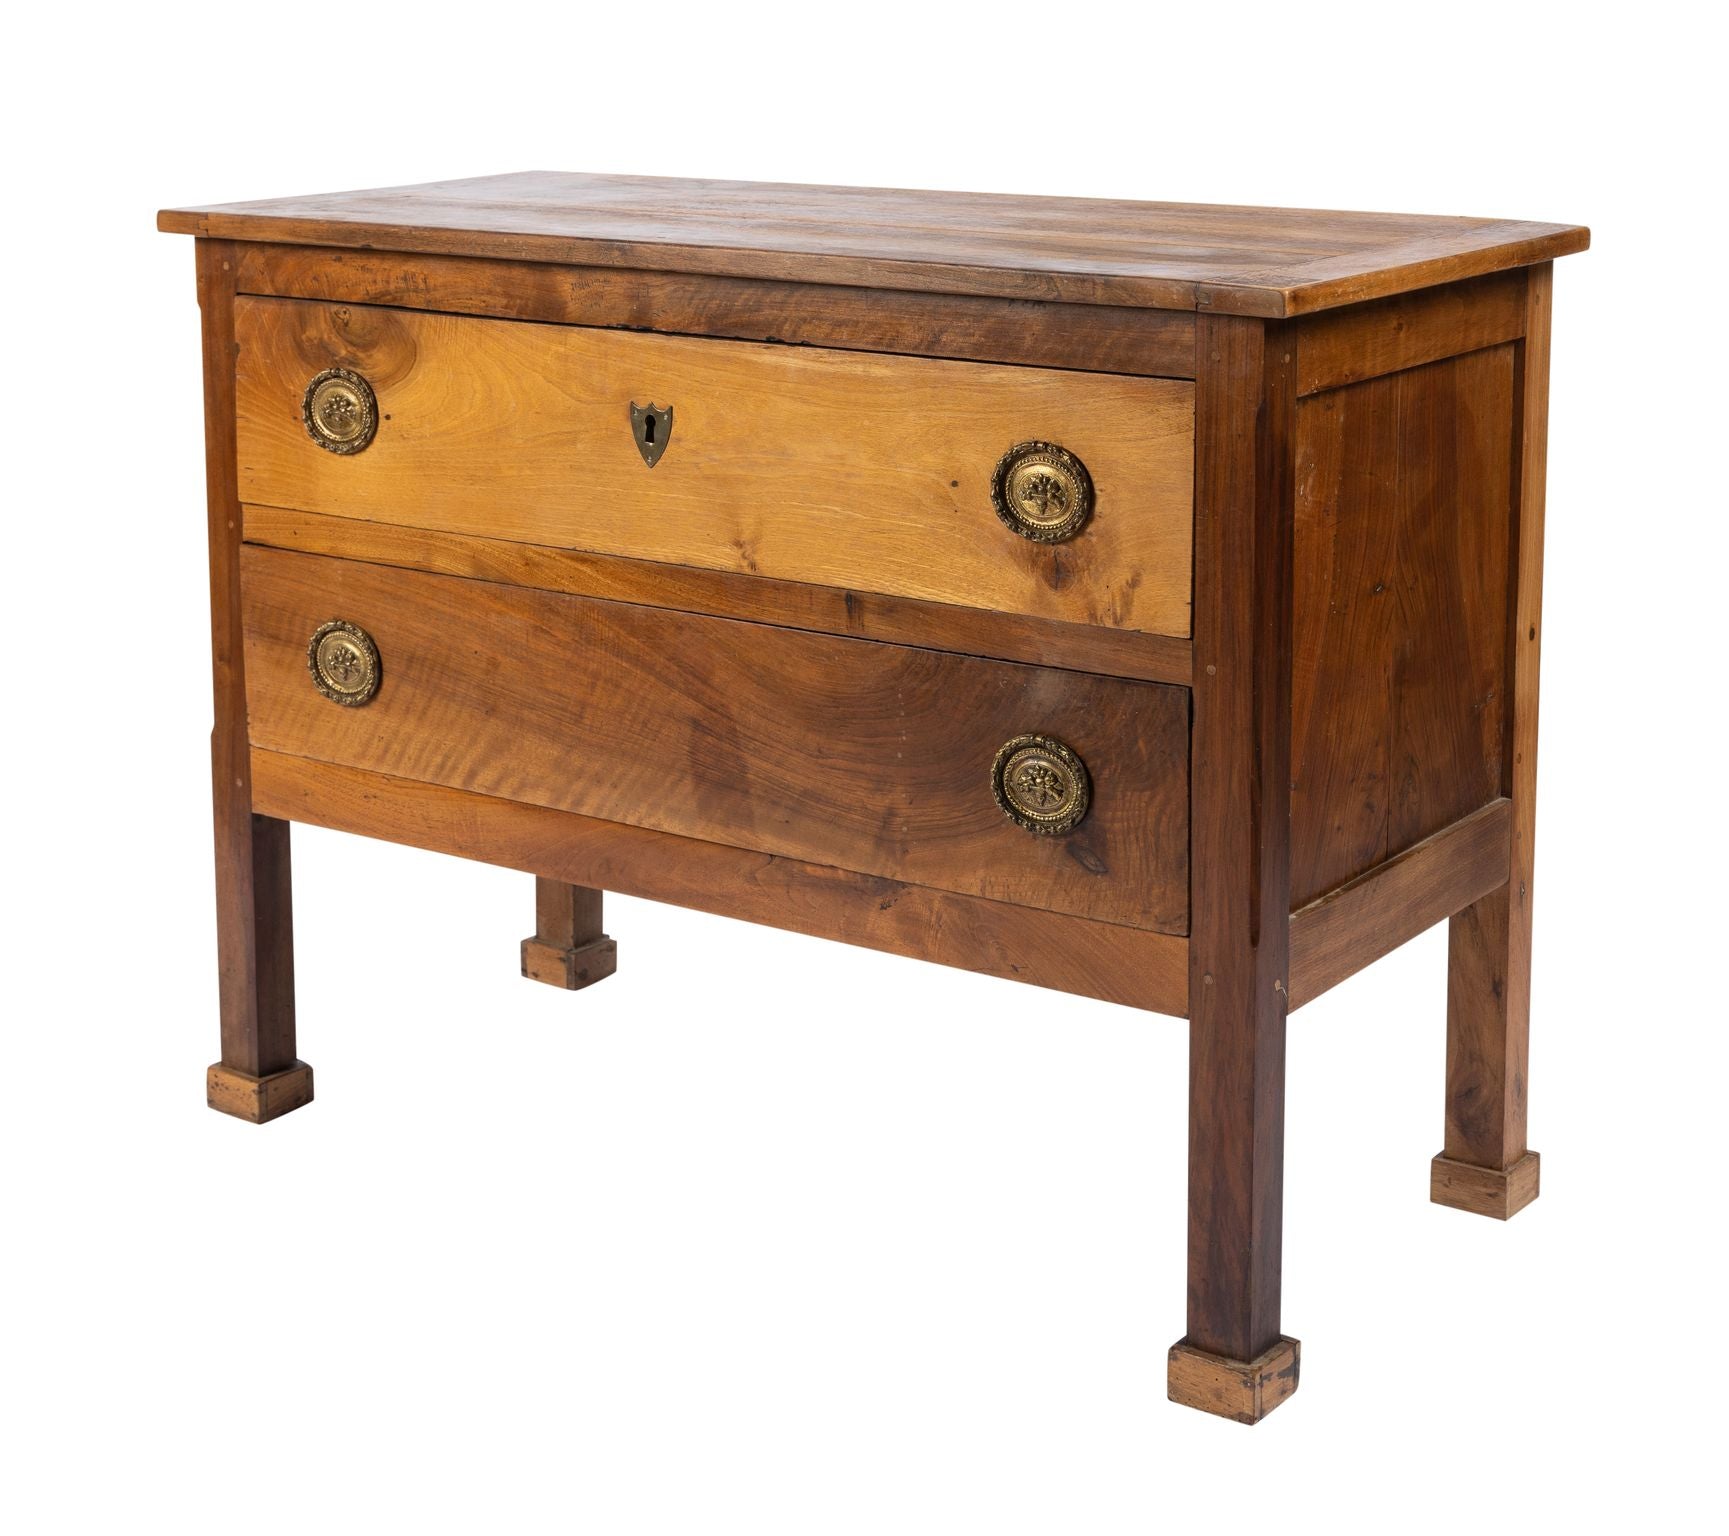 19th century French walnut commode with shield hardware